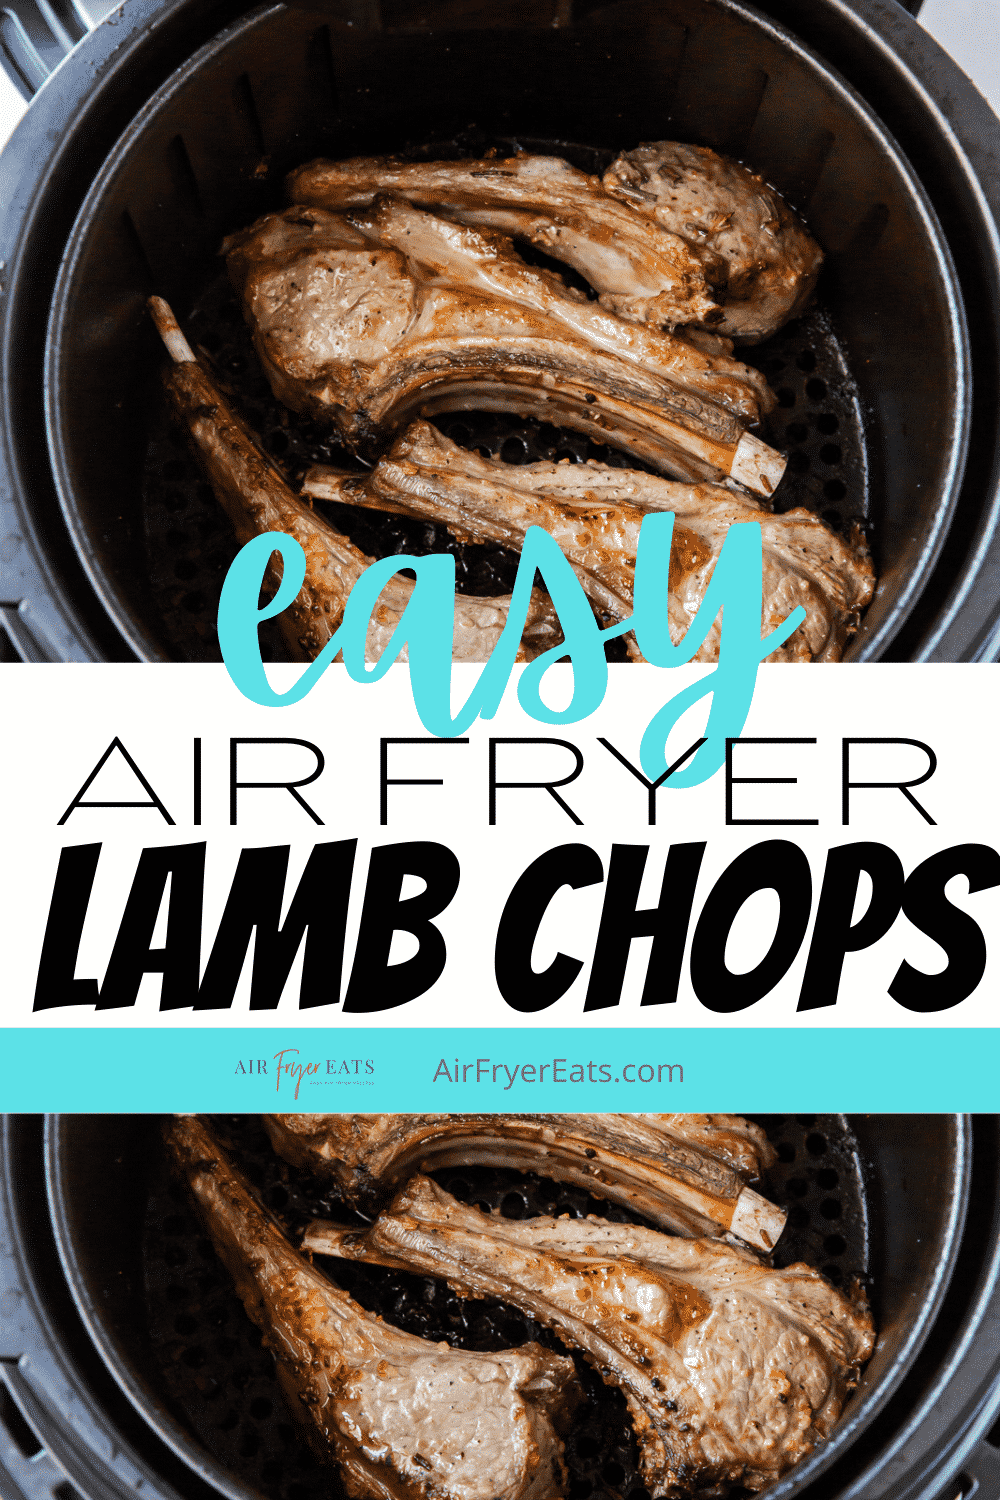 Air Fryer Lamb Chops are cooked perfectly in under 10 minutes. These lamb chops are perfectly seasoned with a flavorful marinade and make an impressive dinner for your family or guests. #airfryer #lamb #lambchops via @vegetarianmamma